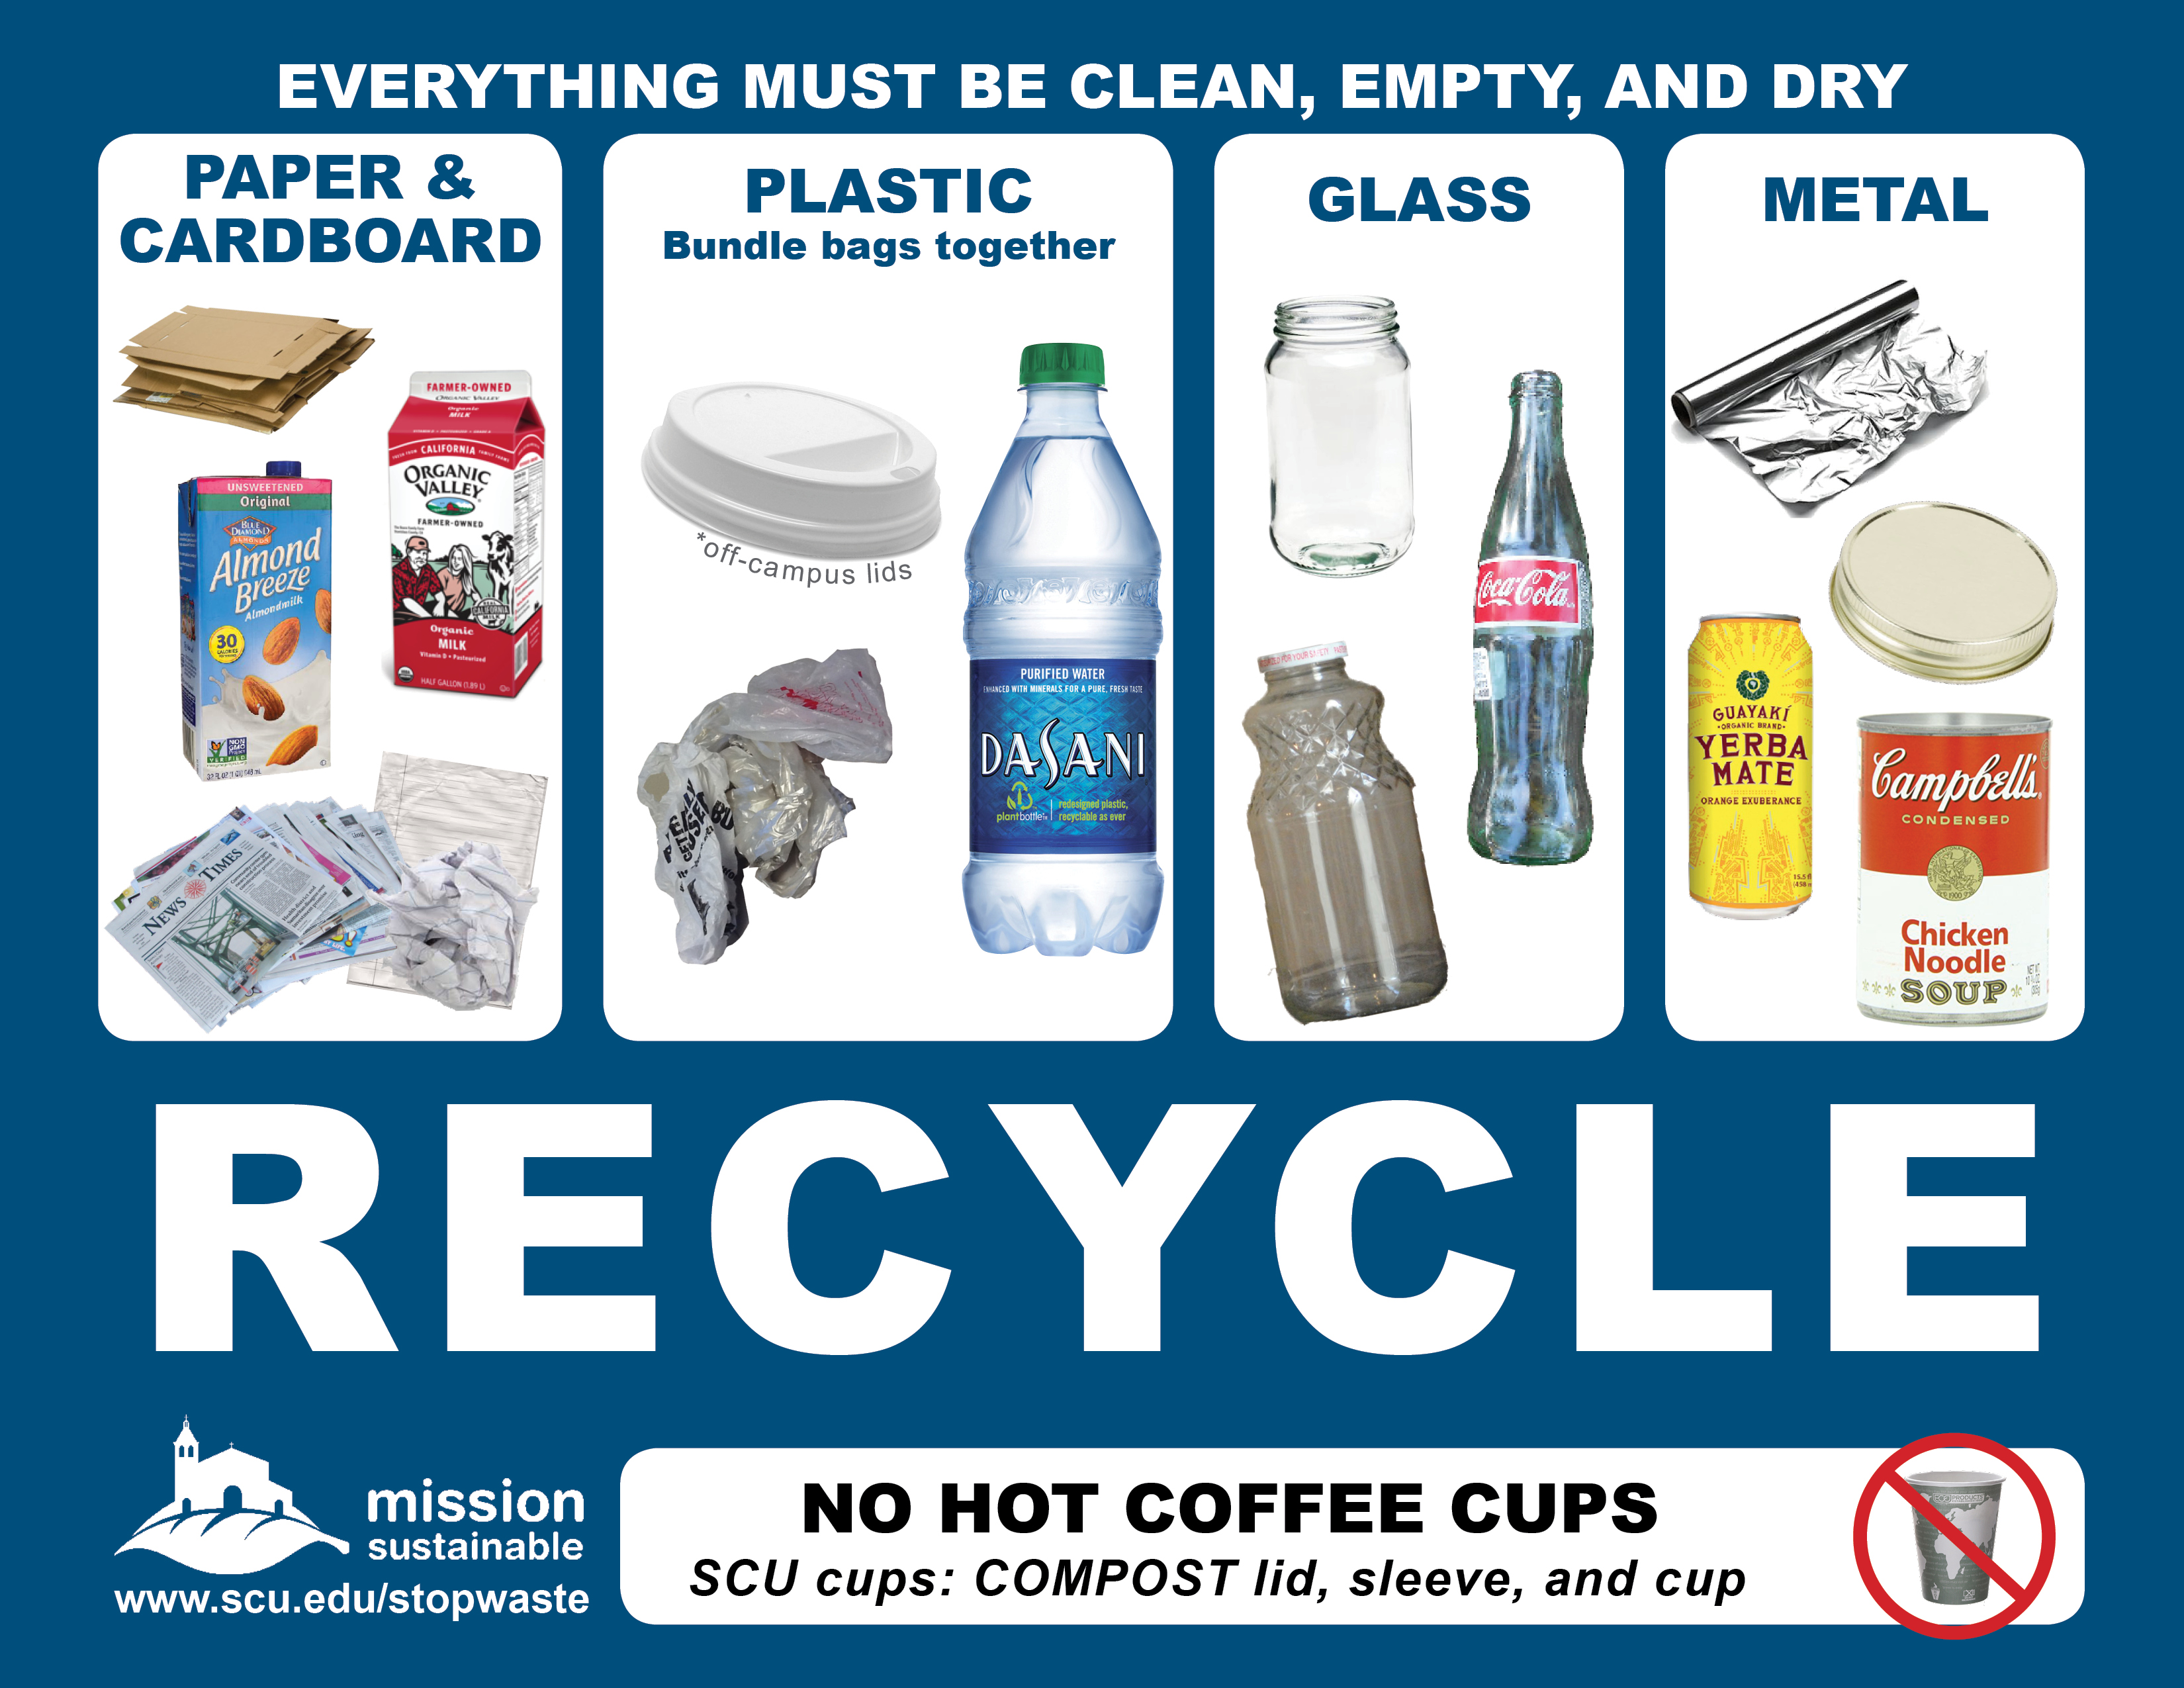 Pictures of items that can be recycled, including glass, plastic bottles, and paper. - Sign showing pictures of items that can be recycled, such as plastic bottles. Link to file